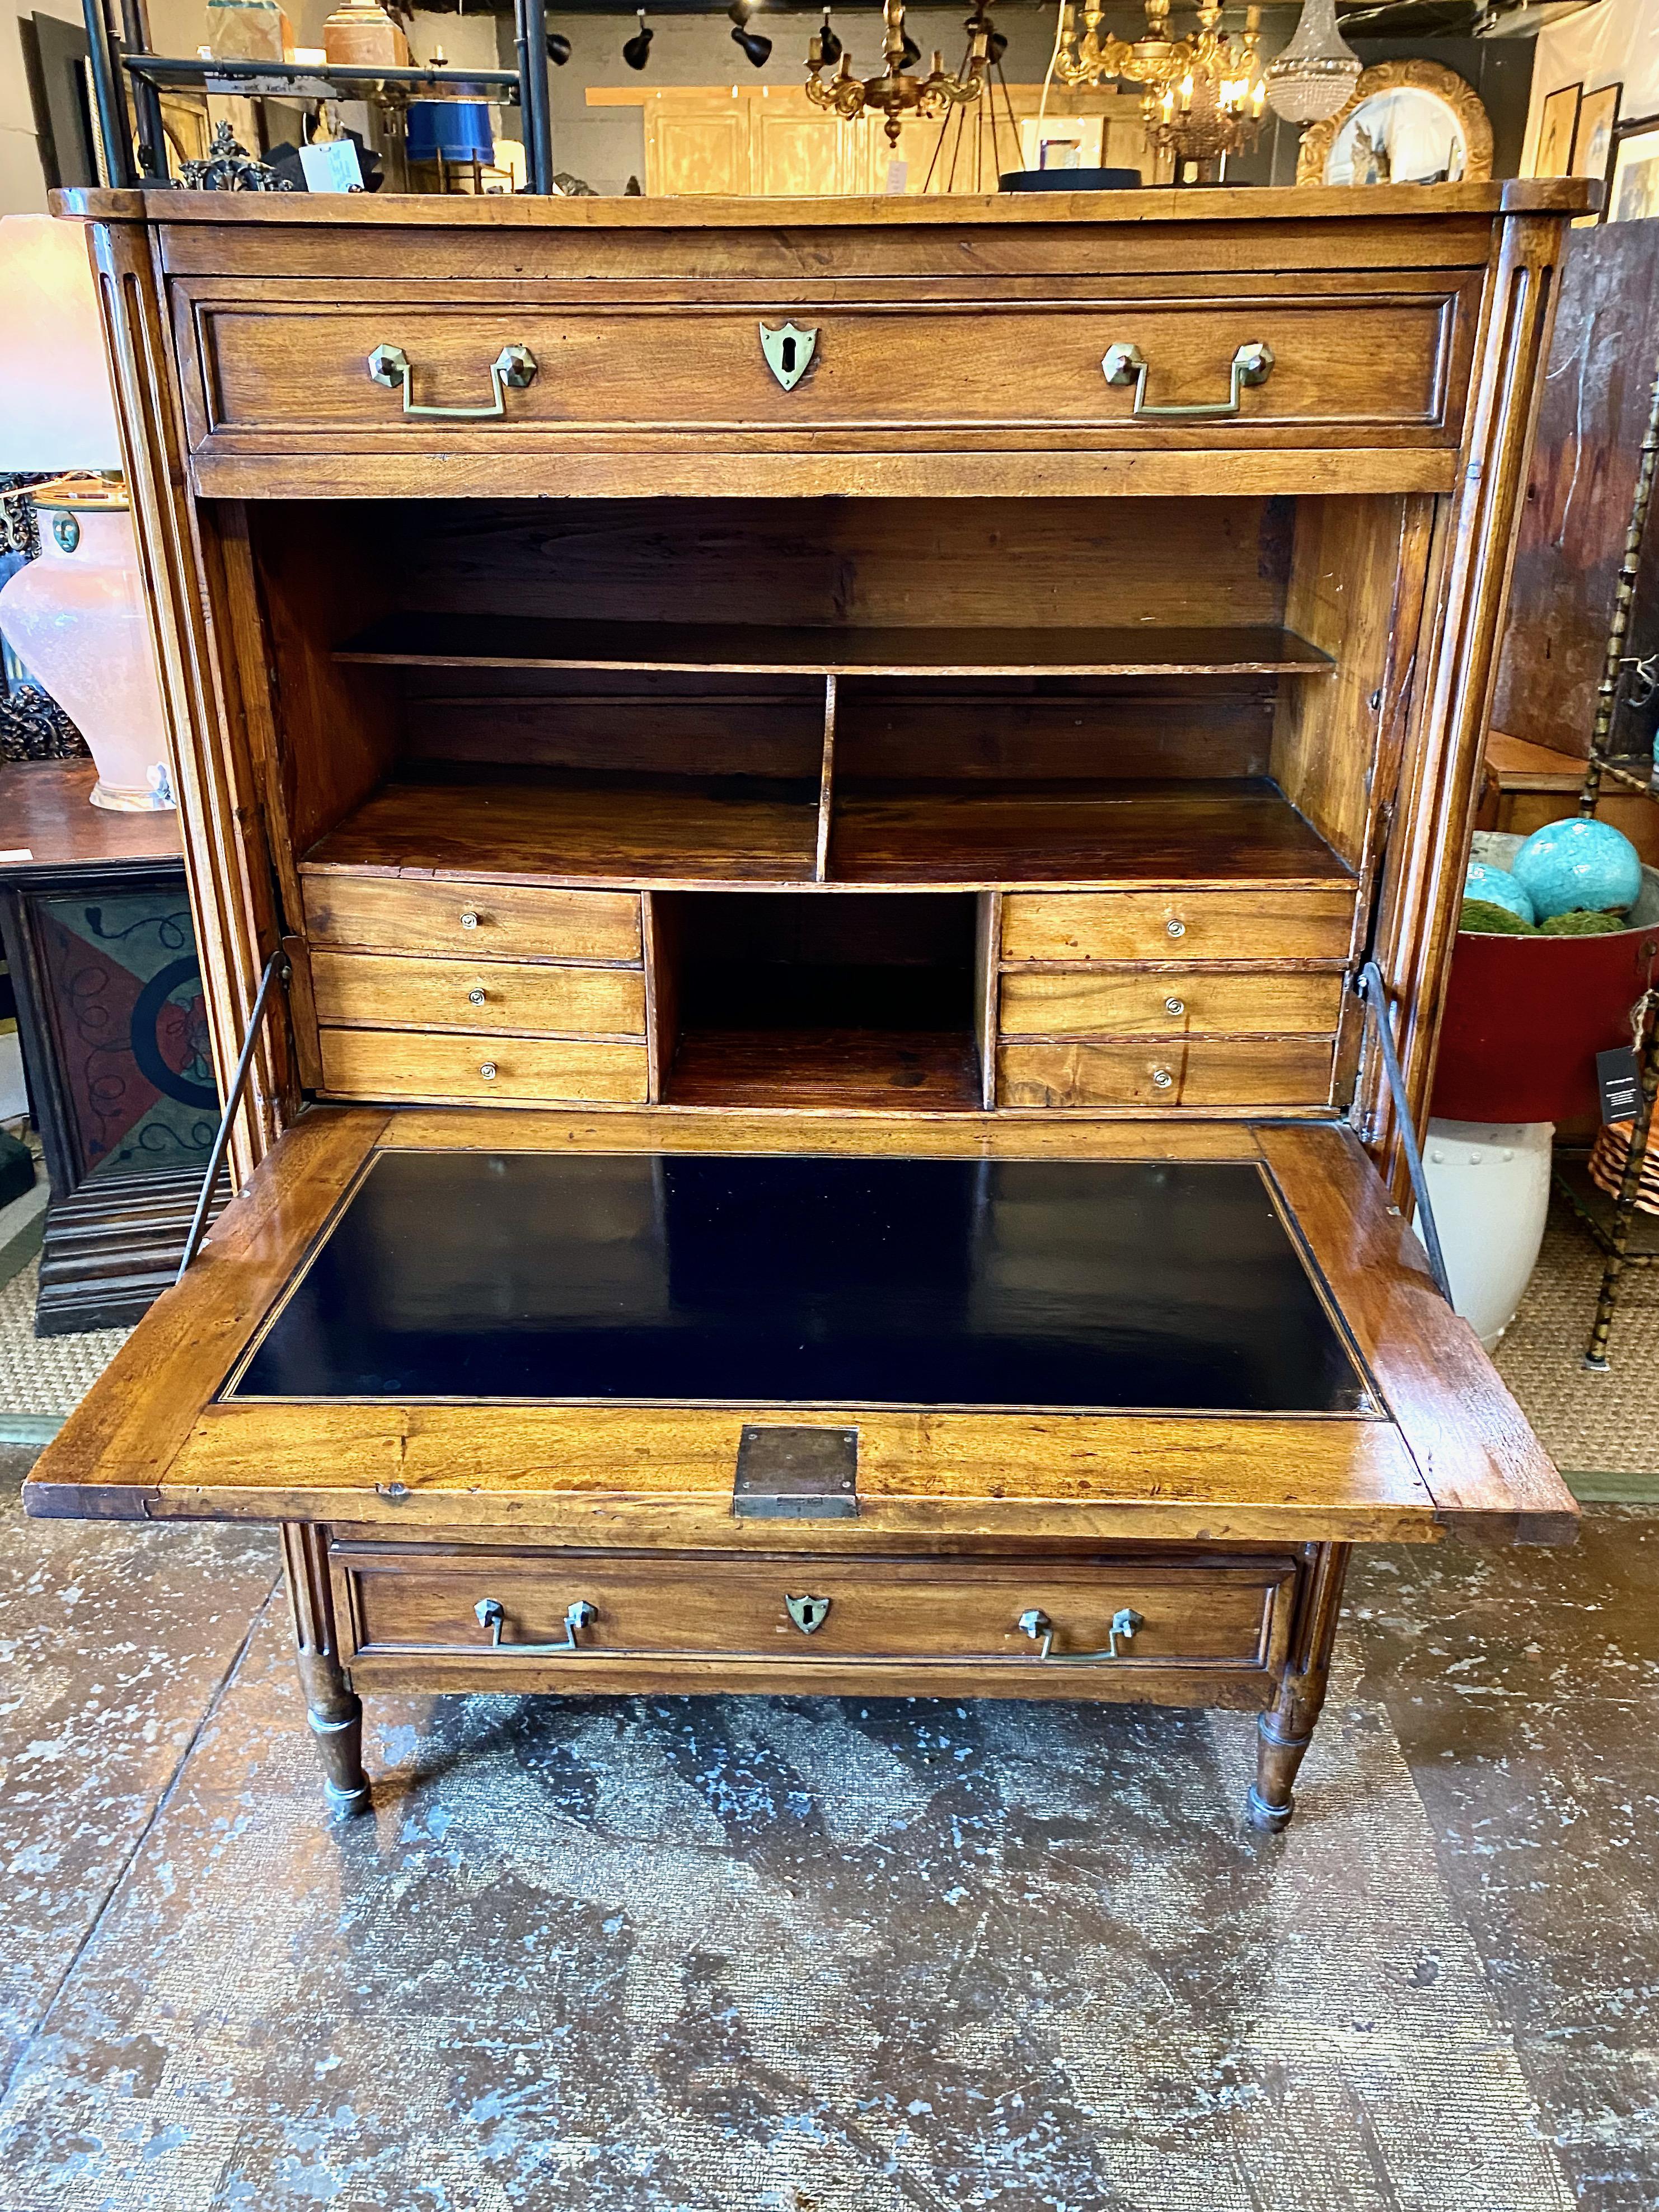 This is a very good example of a late 18th century Louis XVI Secretaire a Abattant. The secretaire is crafted of solid walnut and is a generous 39.5